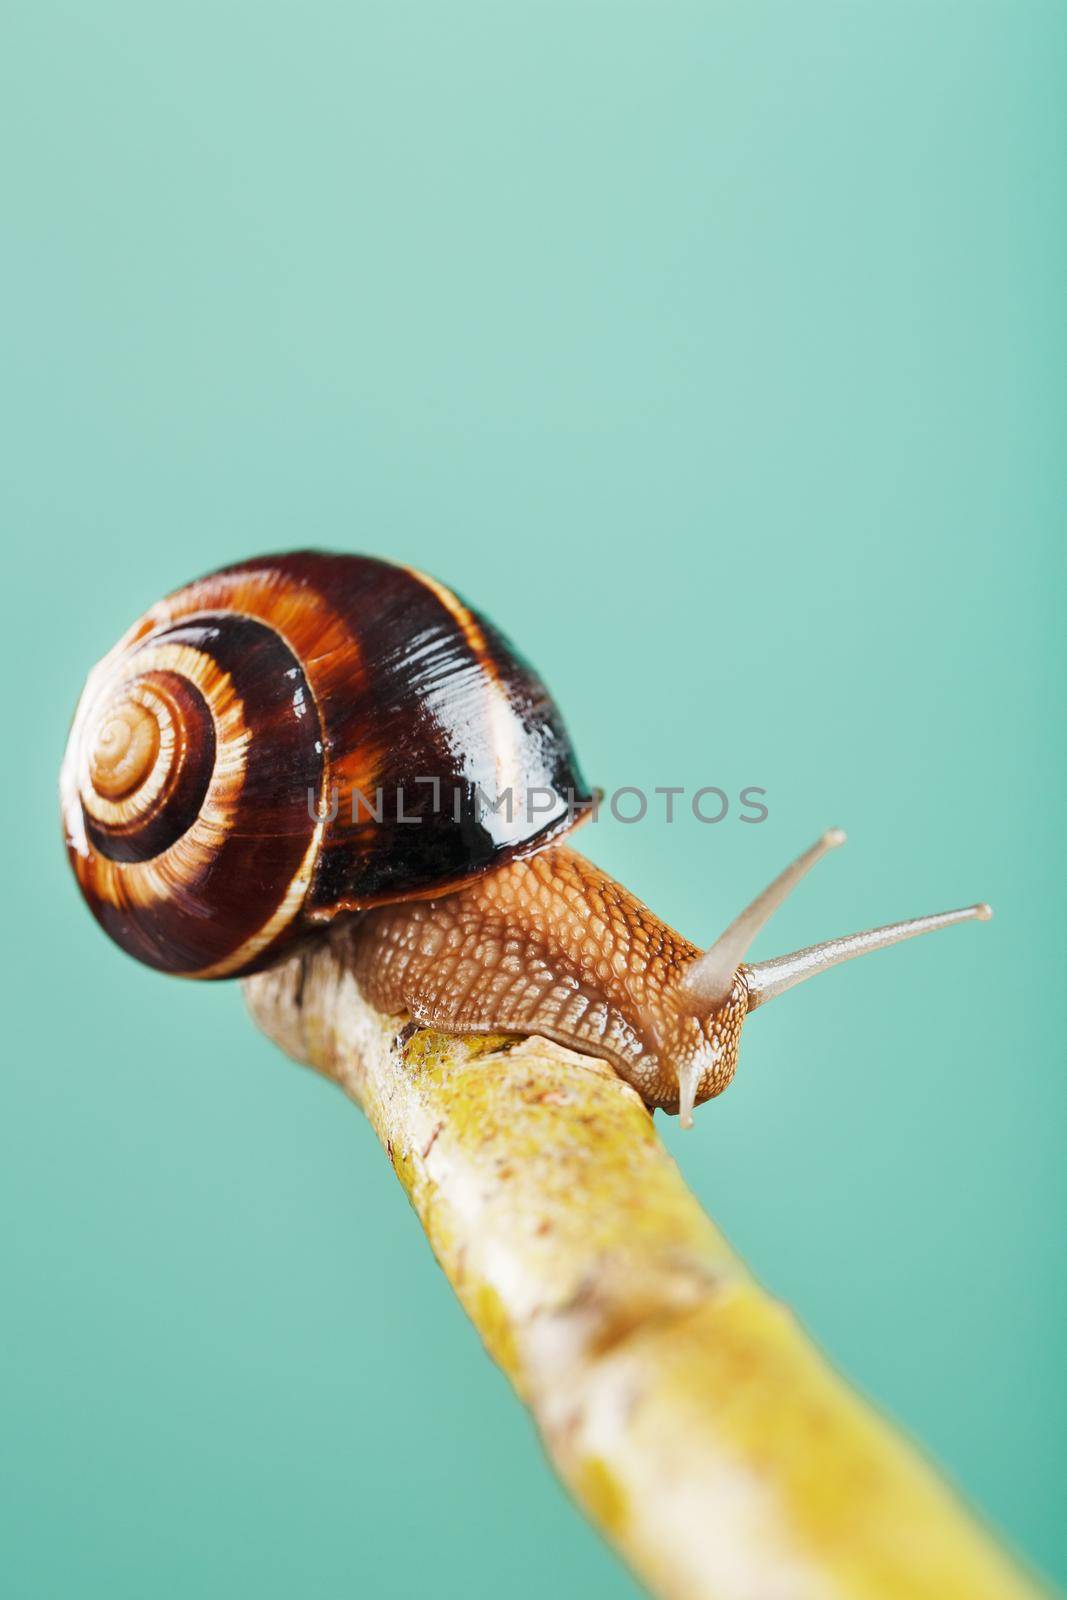 A large snail with horns and a brown shell crawls along a branch on a green background by AlexGrec